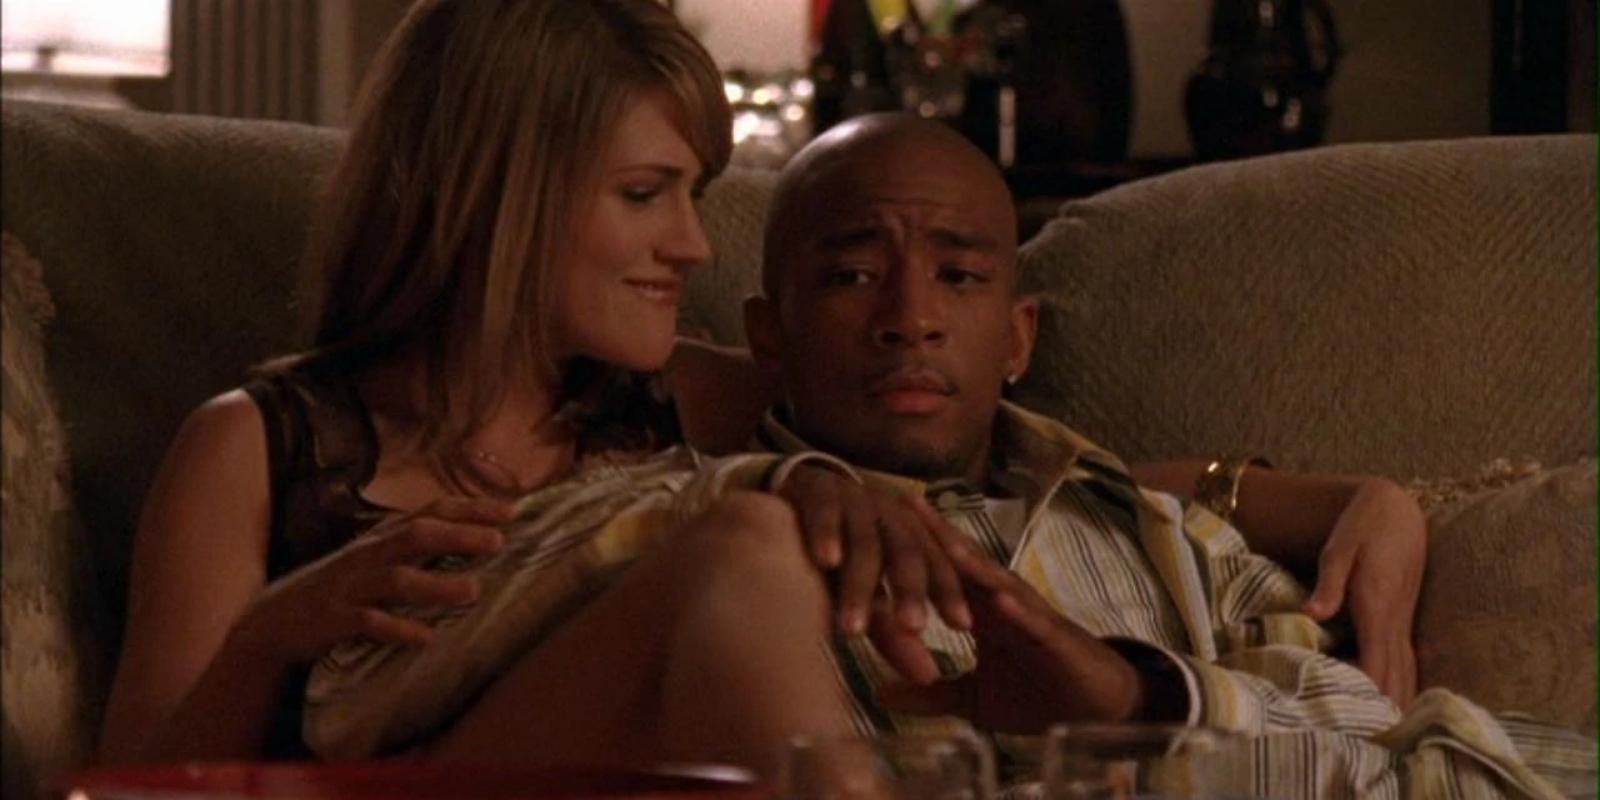 Bevin Mirskey and Skills Taylor cuddle on the couch in One Tree Hill